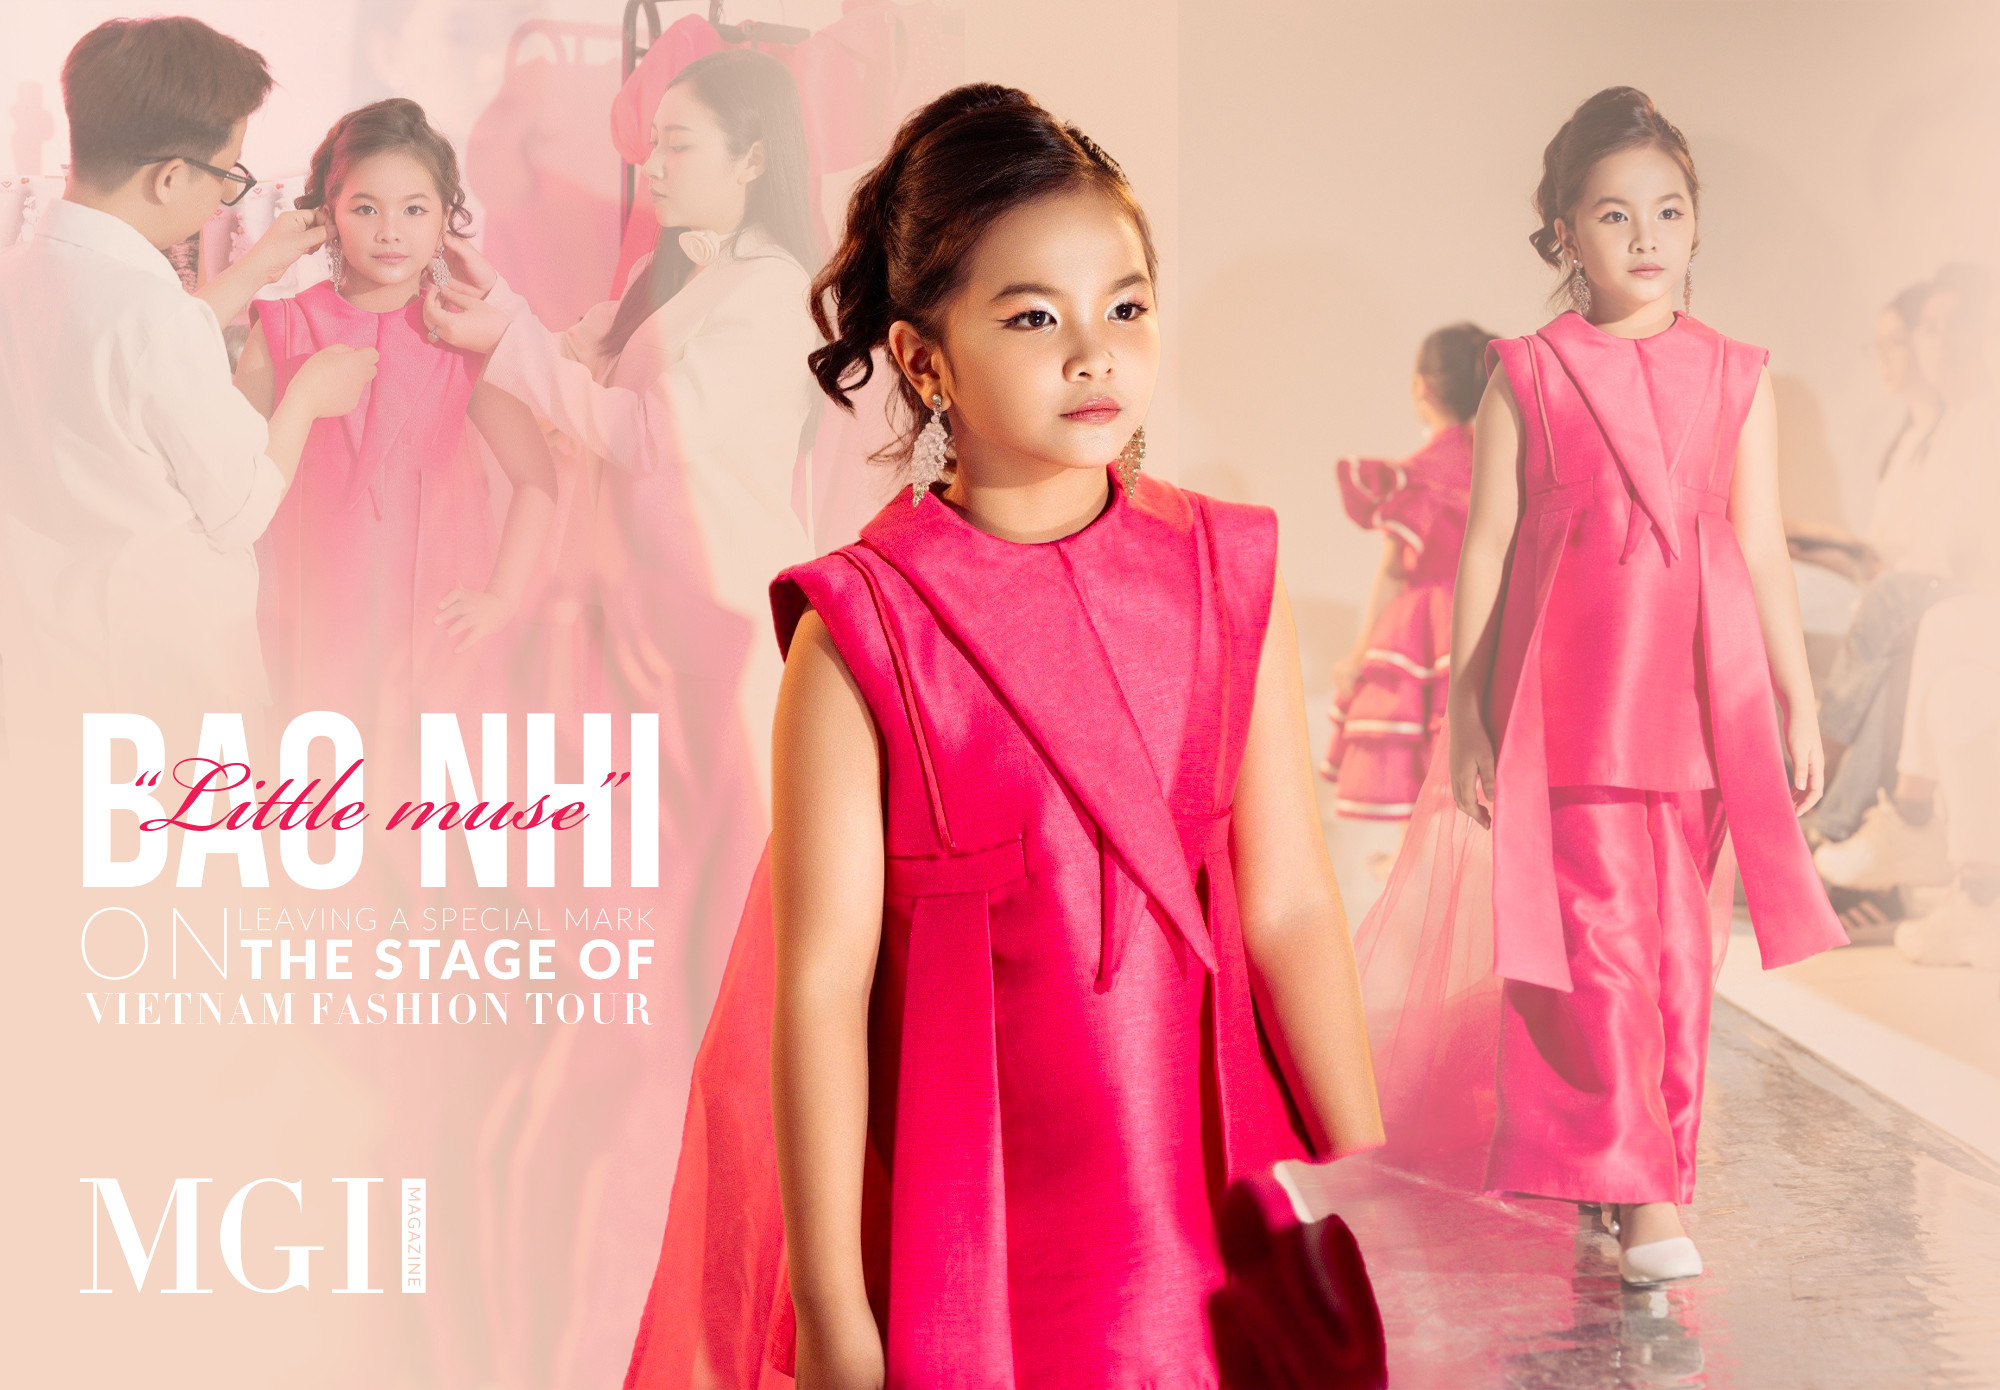 “Little muse” Bao Nhi leaving a special mark on the stage of Vietnam Fashion Tour